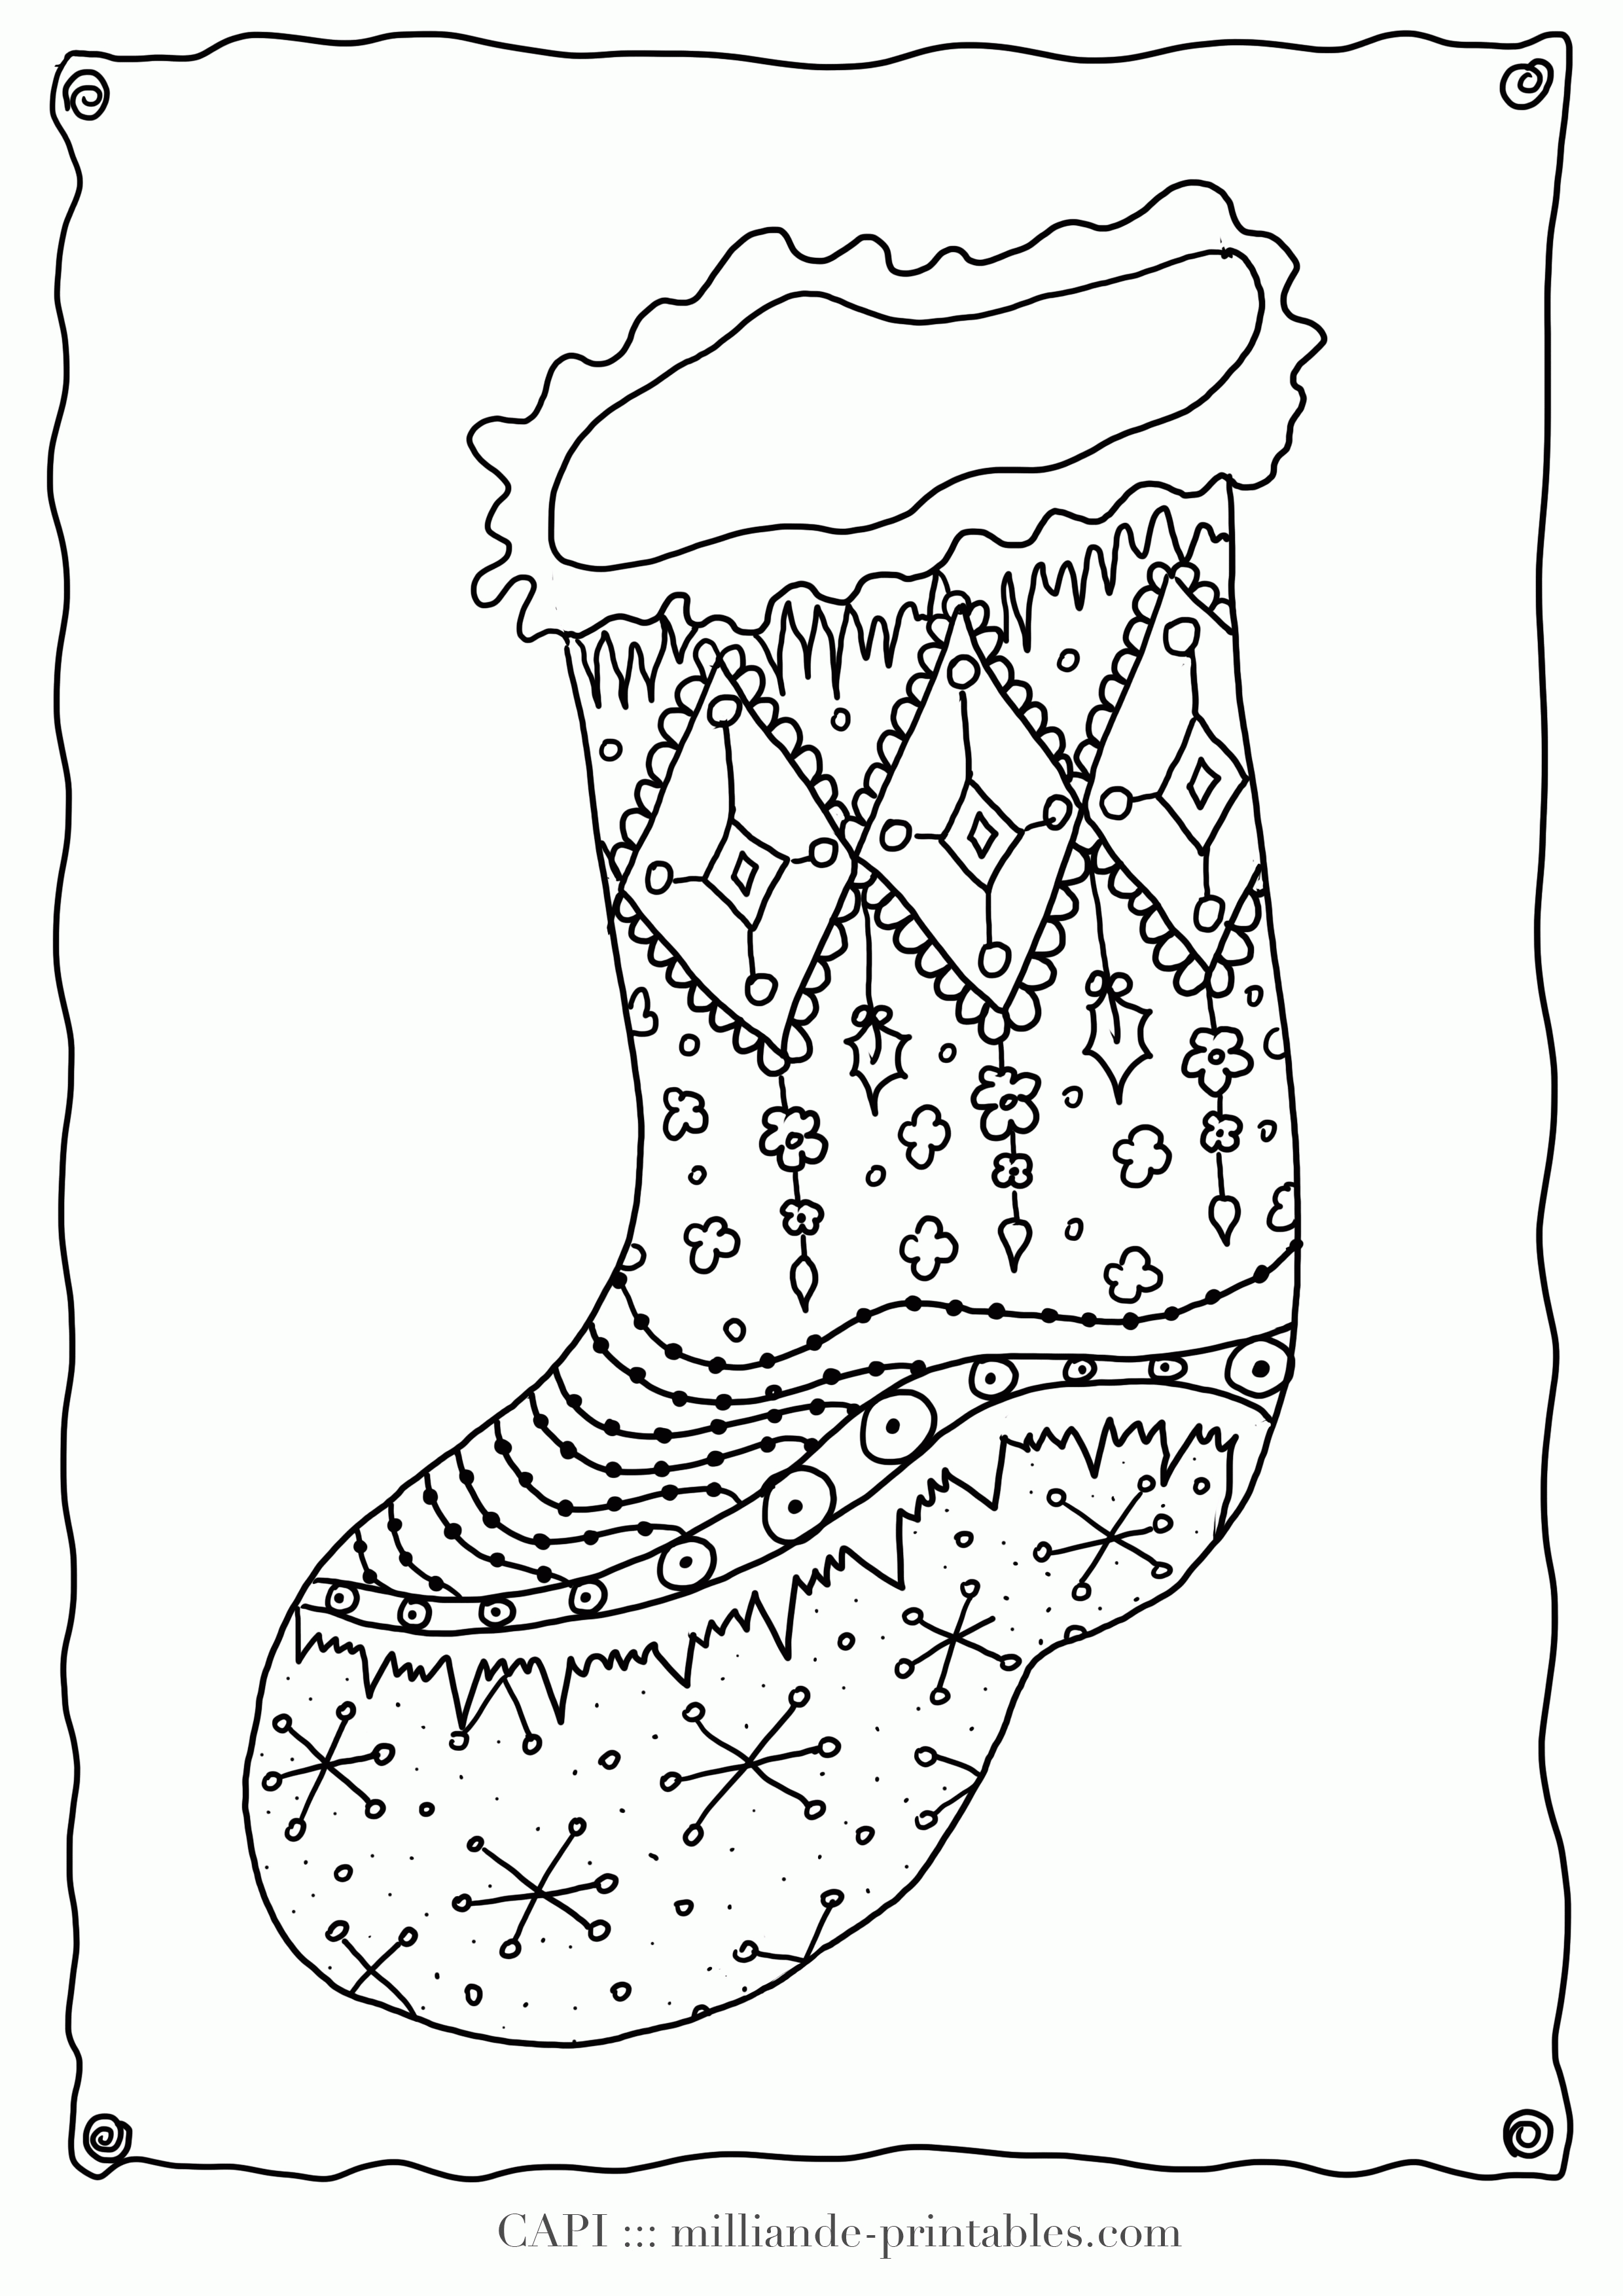 Christmas Coloring Page Stocking, Milliandes Free Christmas